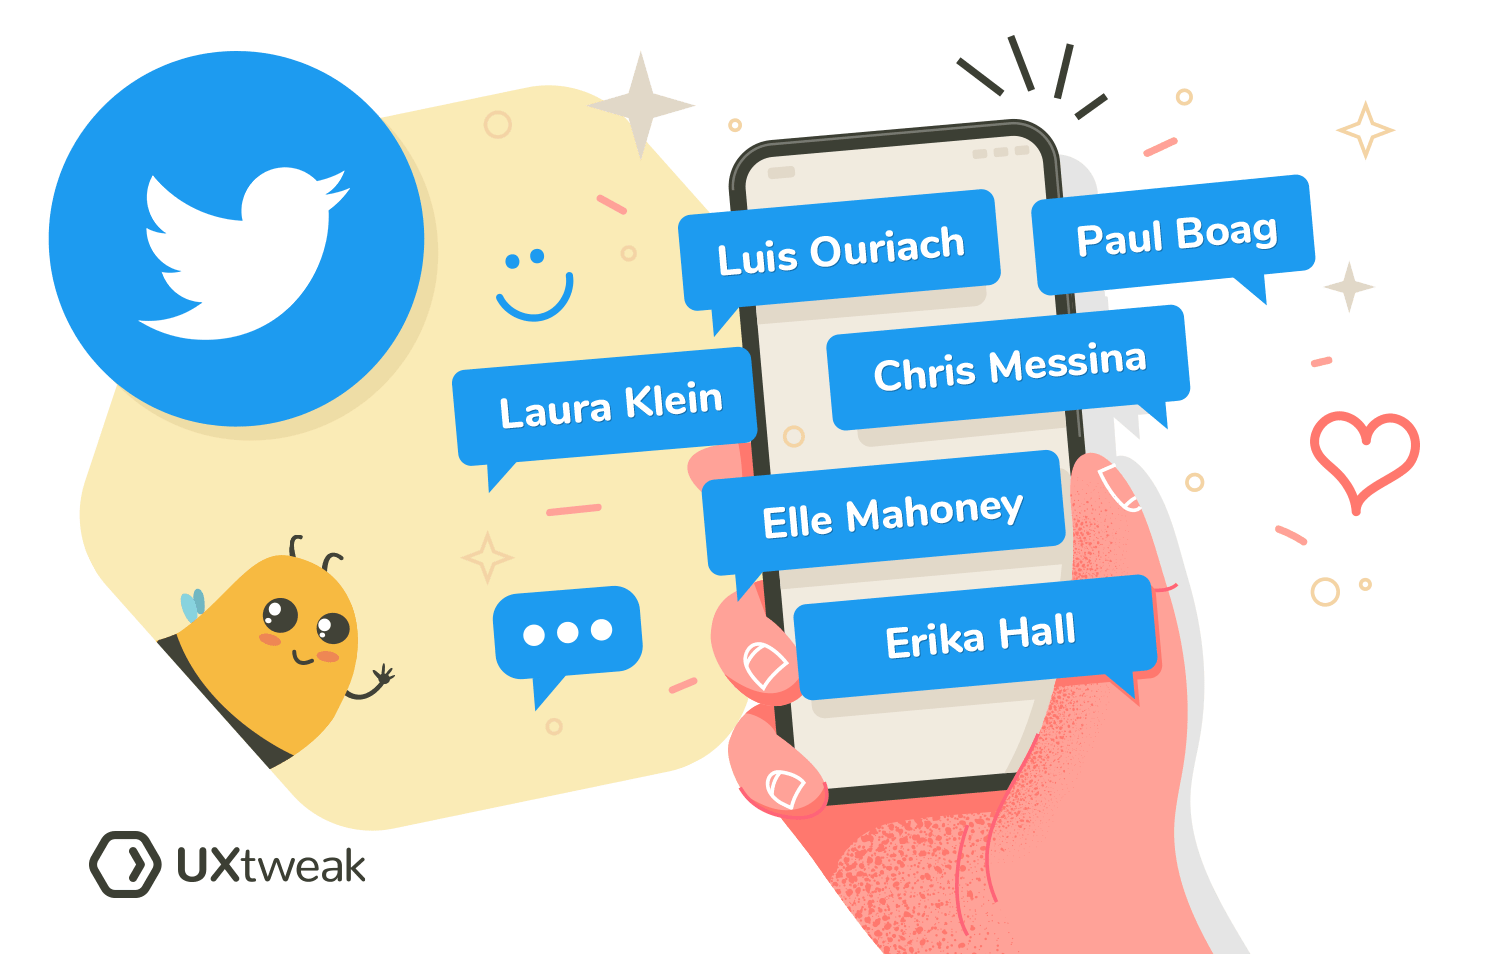 Top UX influencers from twitter